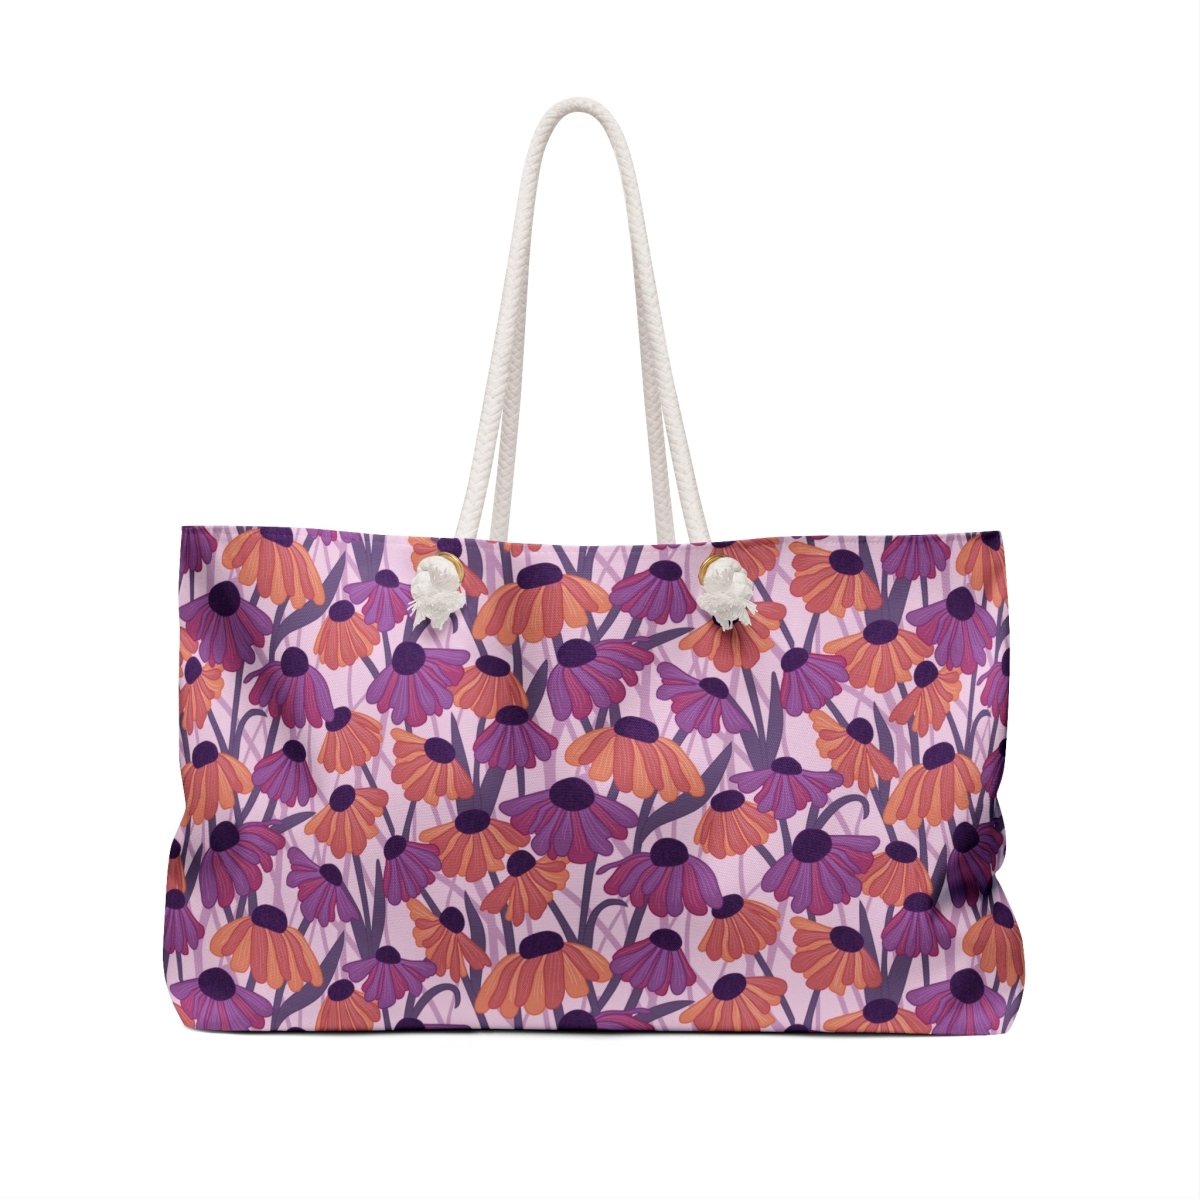 Extra Large Tote Bag in Purple Coneflower - Not in the Kitchen